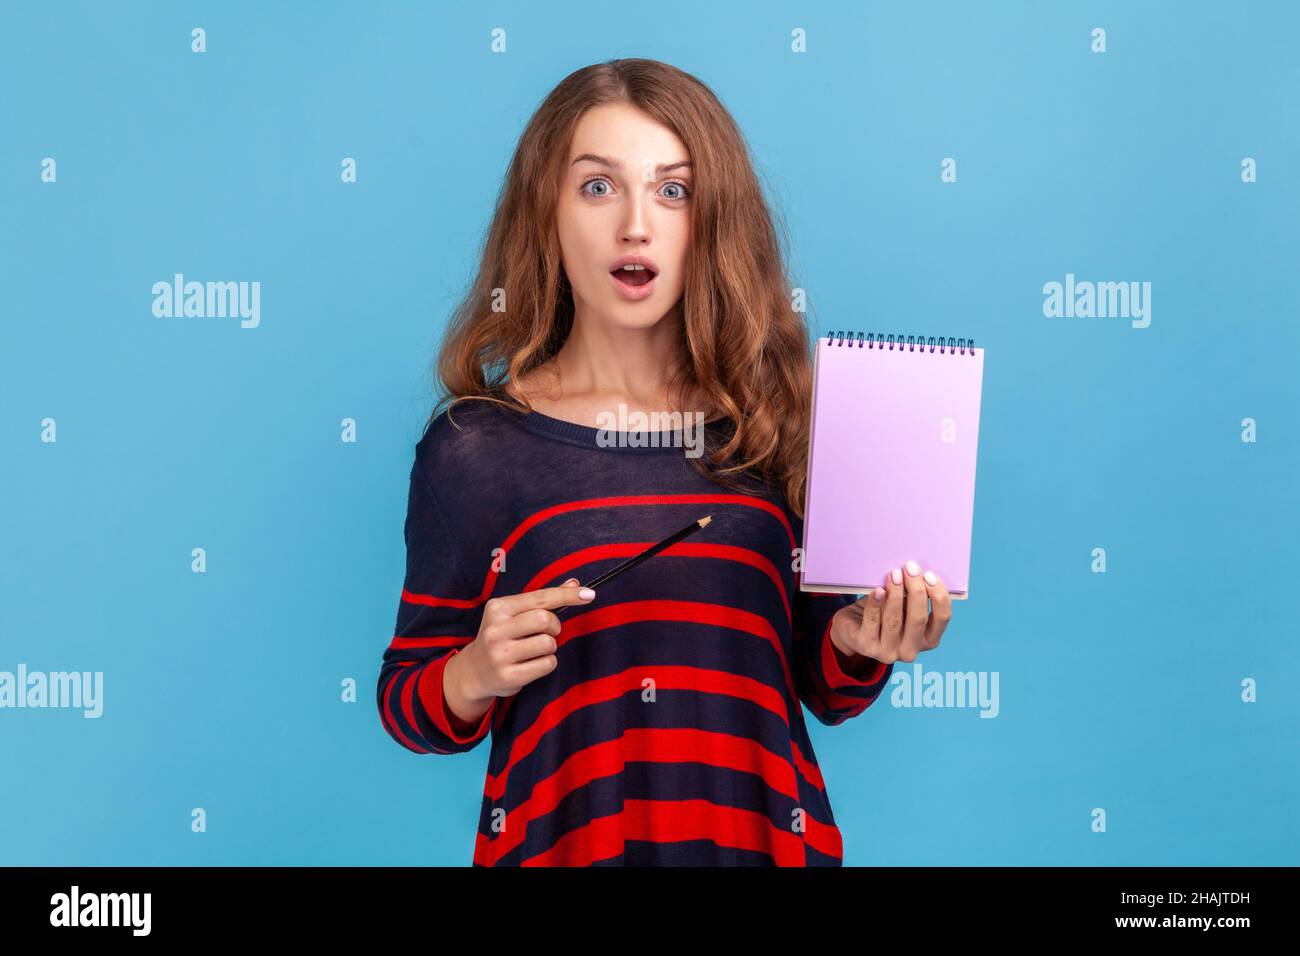 Shocked woman wearing striped casual style sweater, showing blank notebook, advertising area on paper, copy space for to-do list, idea. Indoor studio shot isolated on blue background. Stock Photo